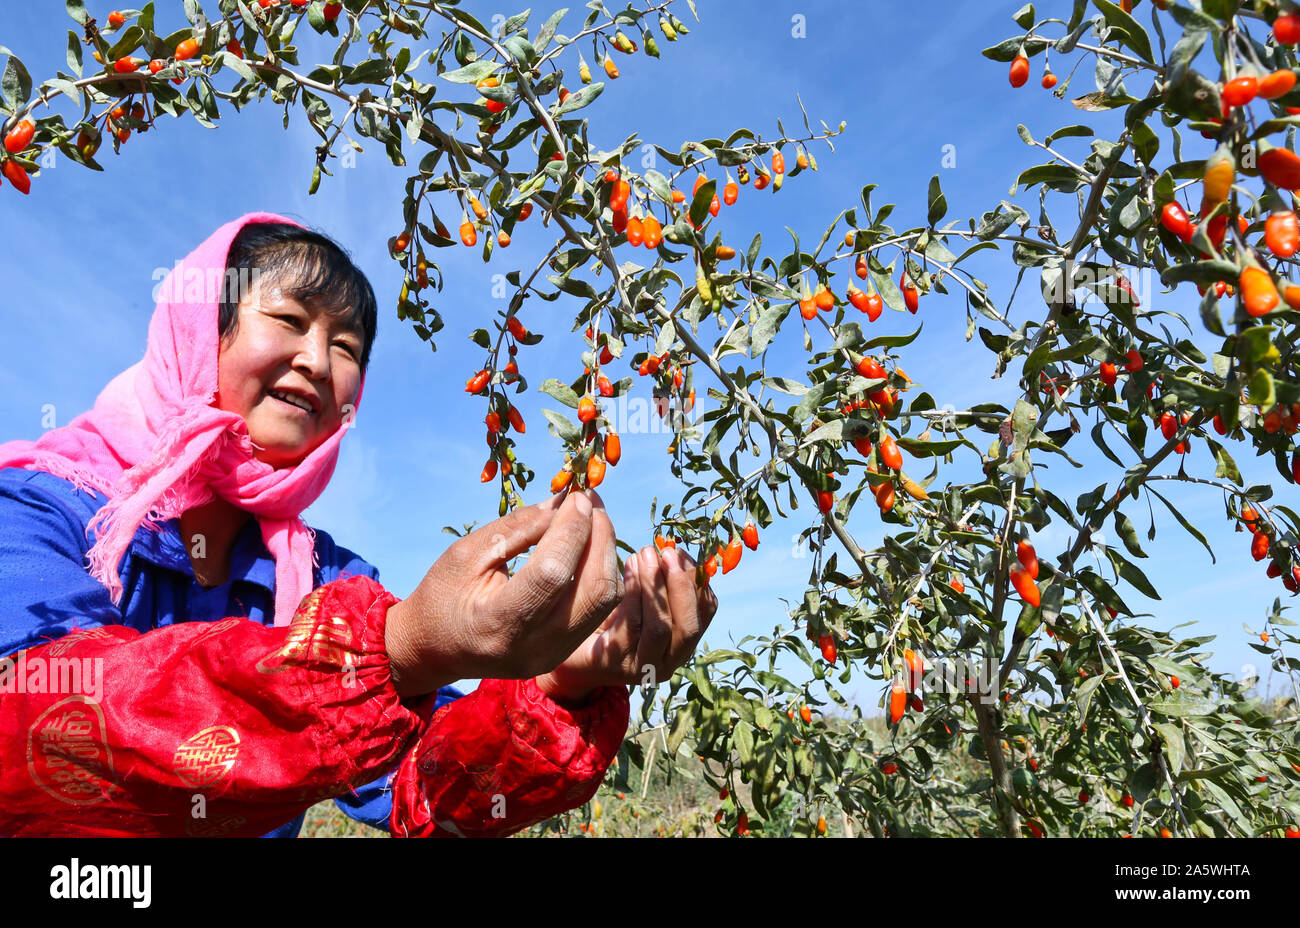 Gansu, Gansu, China. 23rd Oct, 2019. GansuÃ¯Â¼Å'CHINA-On October 22, 2019, farmers were drying and harvesting Lycium barbarum in the ''Poverty Alleviation Workshop'' of Miaojiabu Village, Anyang Township, Ganzhou District, Zhangye, Gansu Province. In recent days, Miao Jiabu Village, Anyang Township, Zhangye Ganzhou District, Gansu Province, located in the northern foot of Qilian Mountain, Gansu Province, planted 2000 mu of organic Lycium barbarum on the sloping land without pollution under Qilian Mountains. At present, organic Lycium barbarum has achieved a bumper harvest in the seventh ha Stock Photo